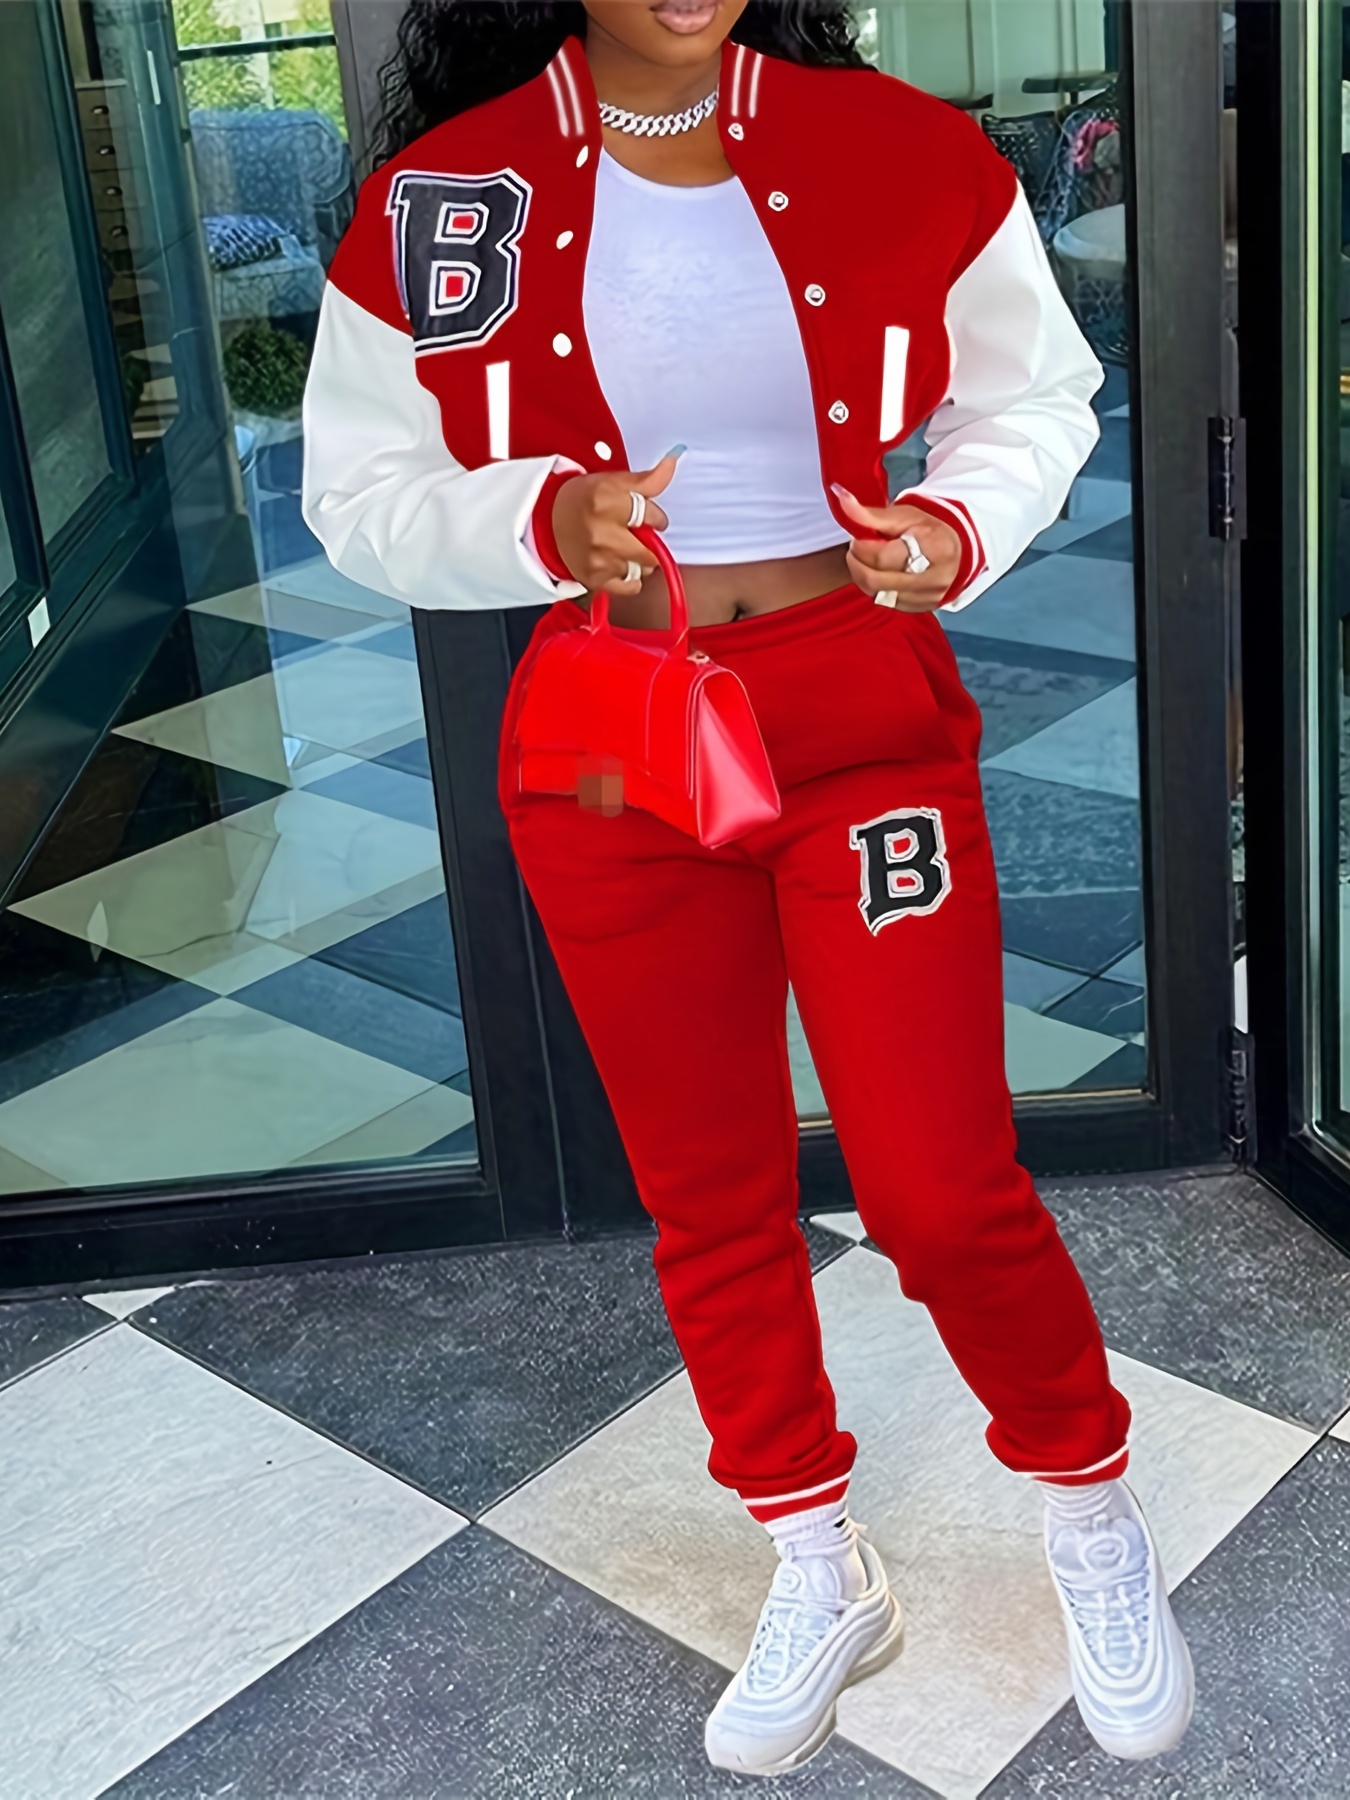 Fashion Trends  Jacket outfit women, Varsity jacket outfit, Jacket outfits